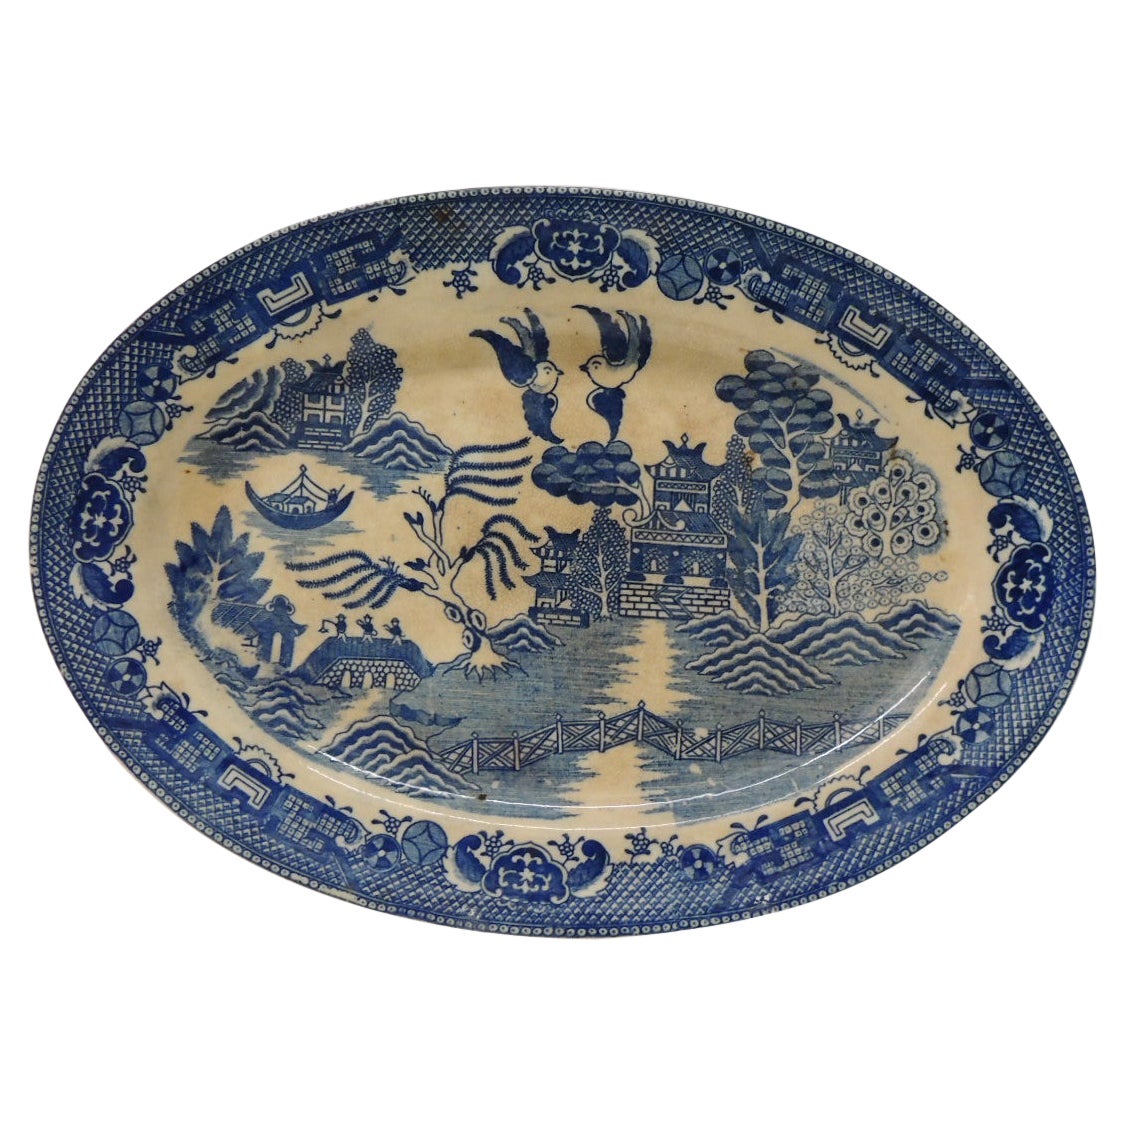 Vintage Oval Decorative Small Platter with Blue and White Willow Pattern